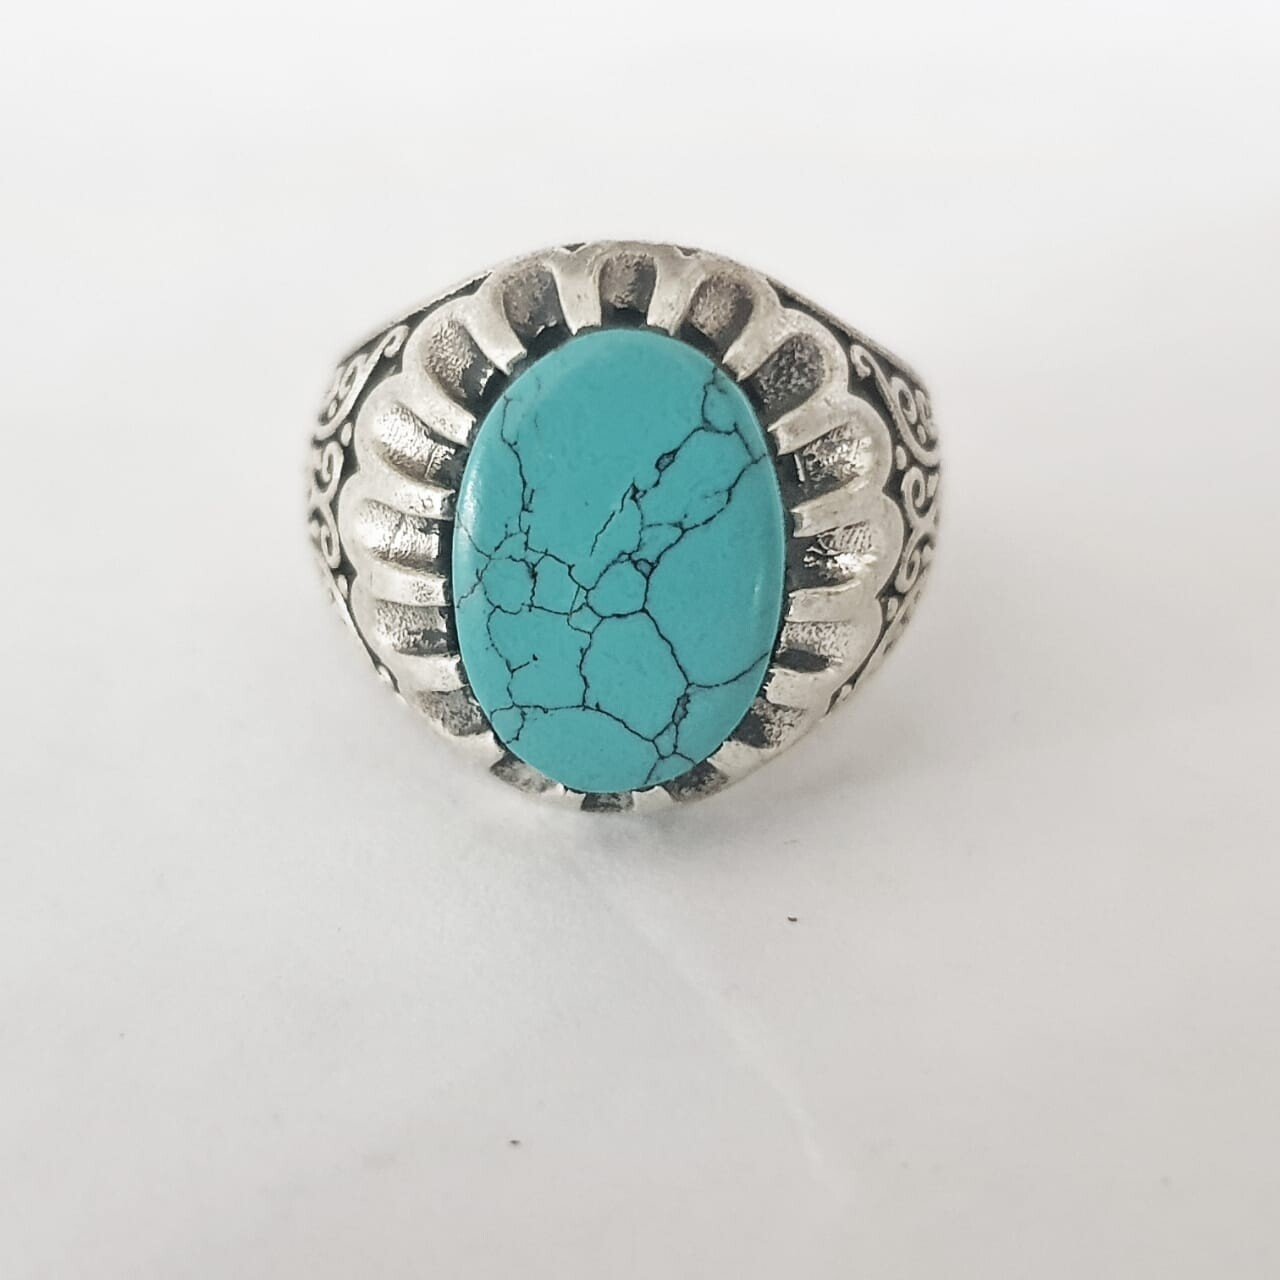 Handcrafted Sky Blue Topaz Ring